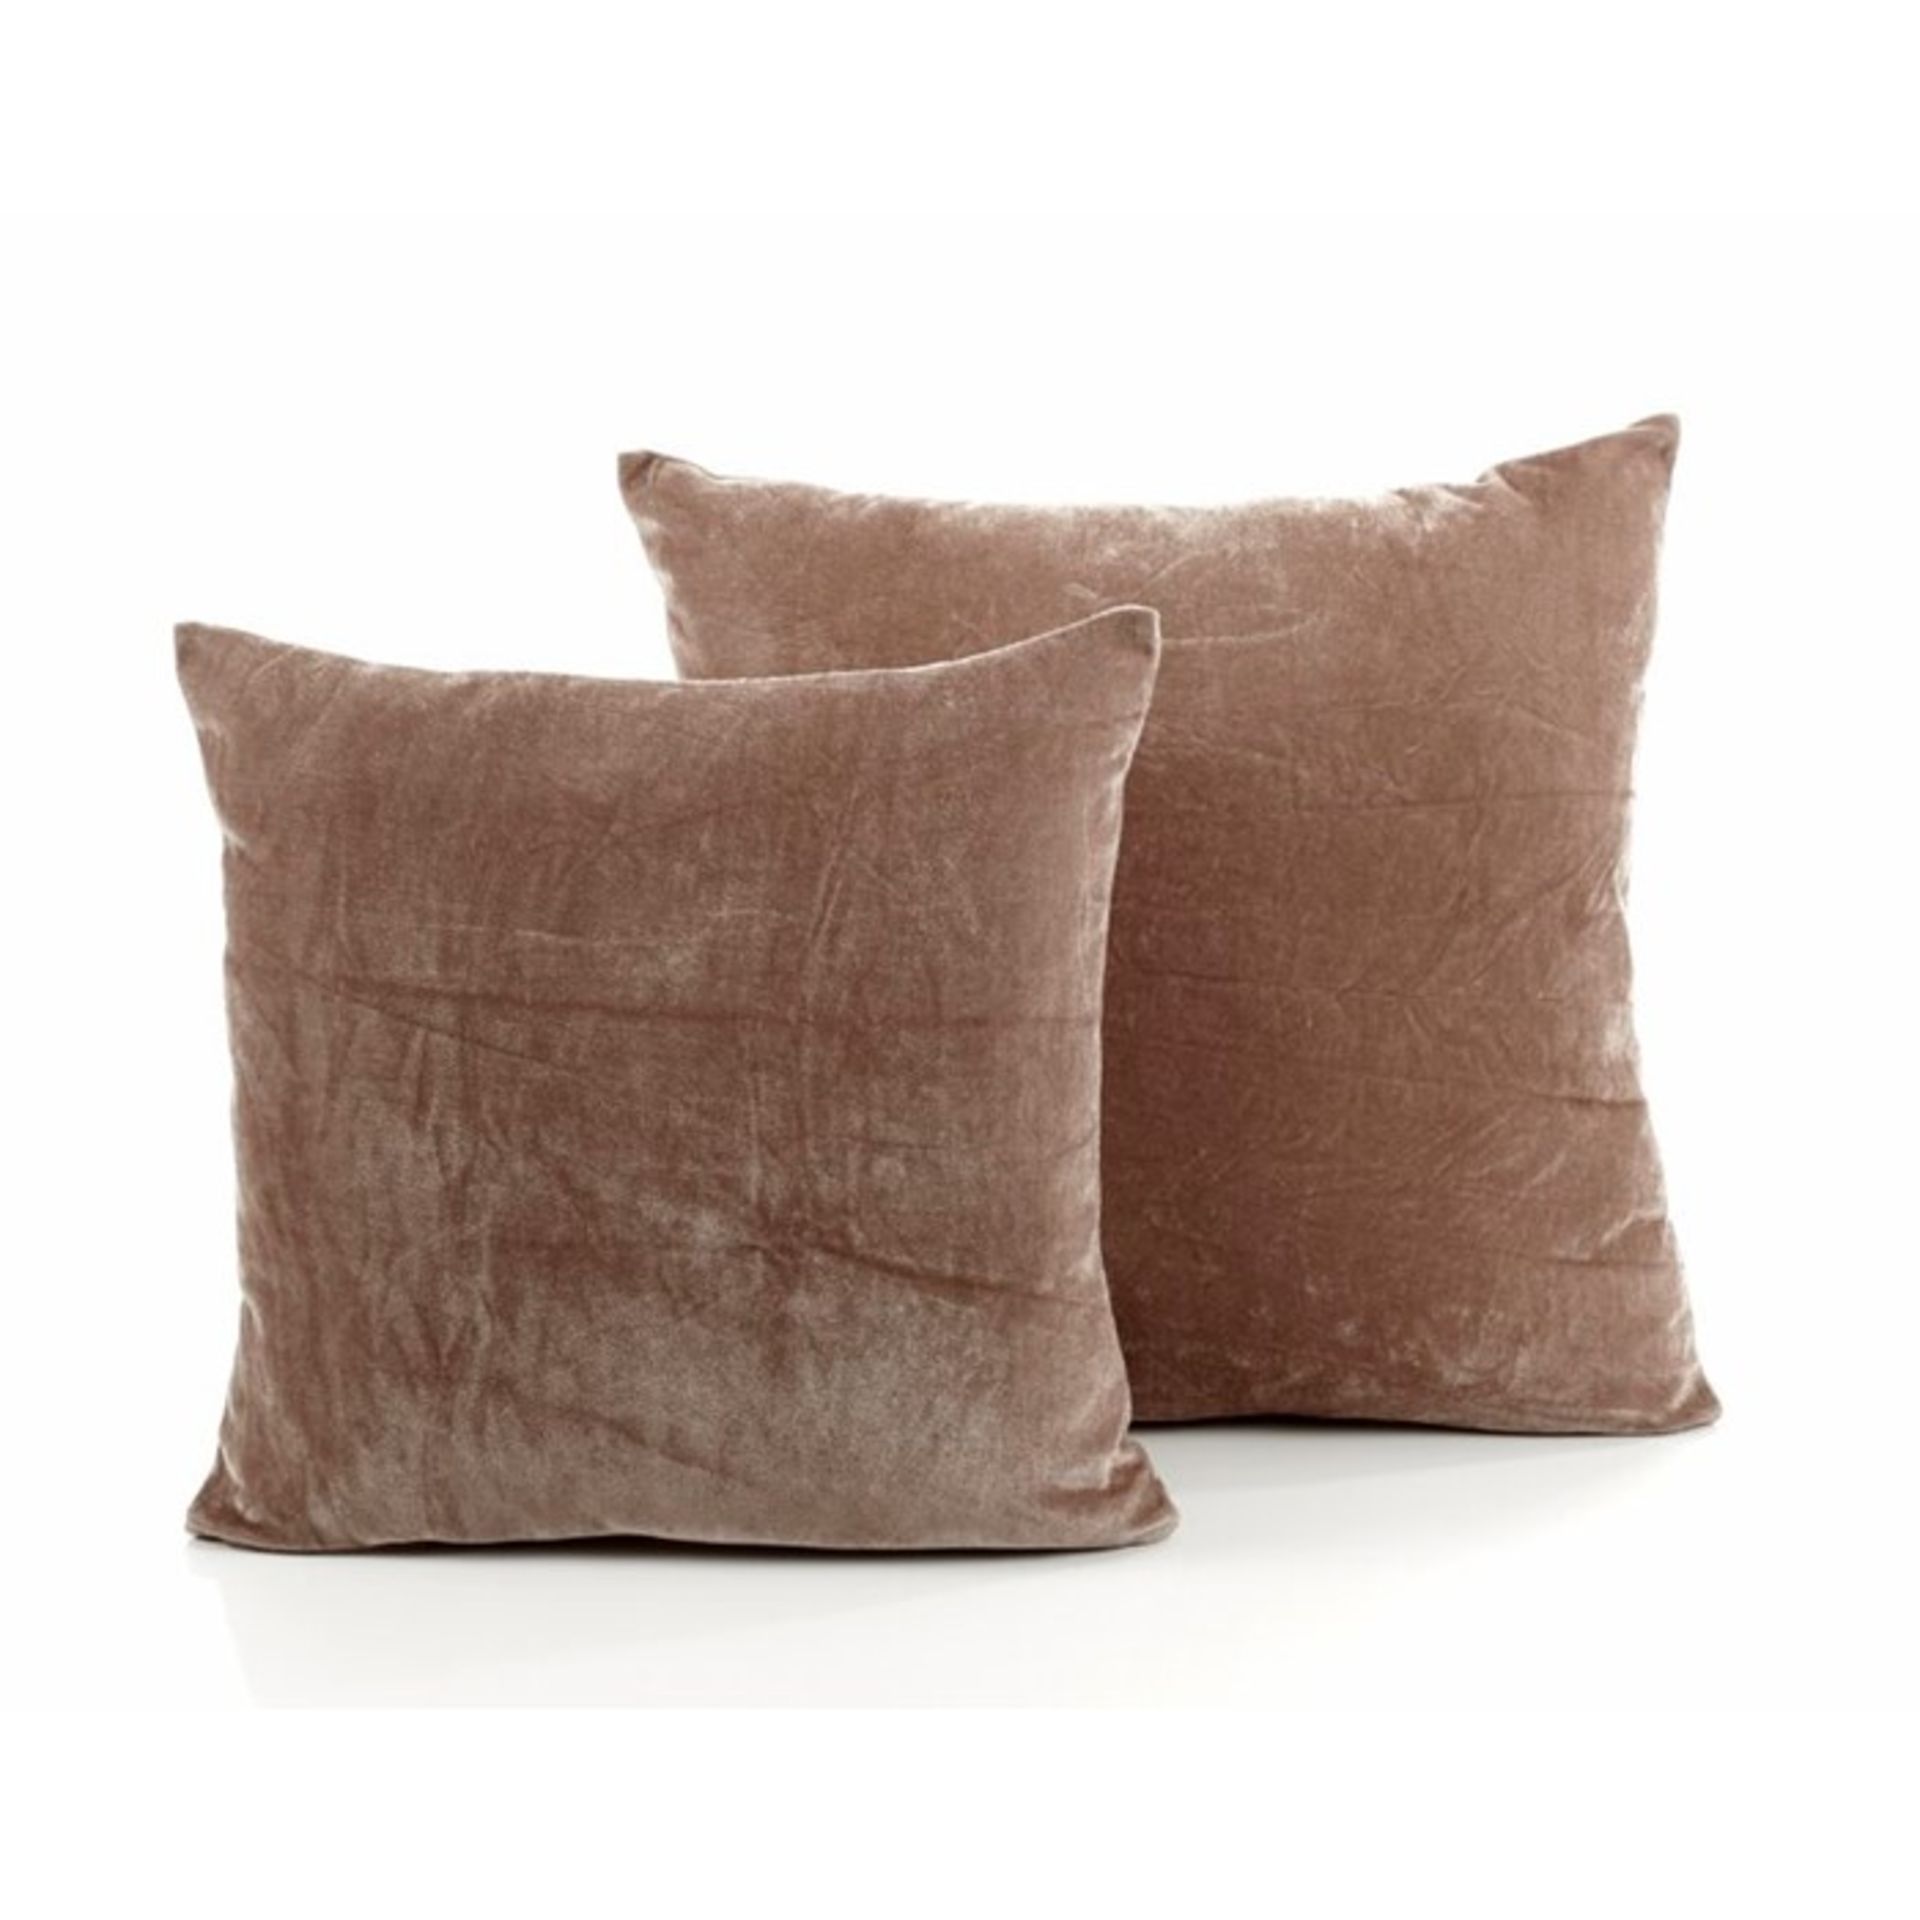 Marlow Home Co., Parsonsfield Cushion X2 (SILVER) - RRP £9.2 (ANSY1200 - 14147/116 - 14147/117) 1B